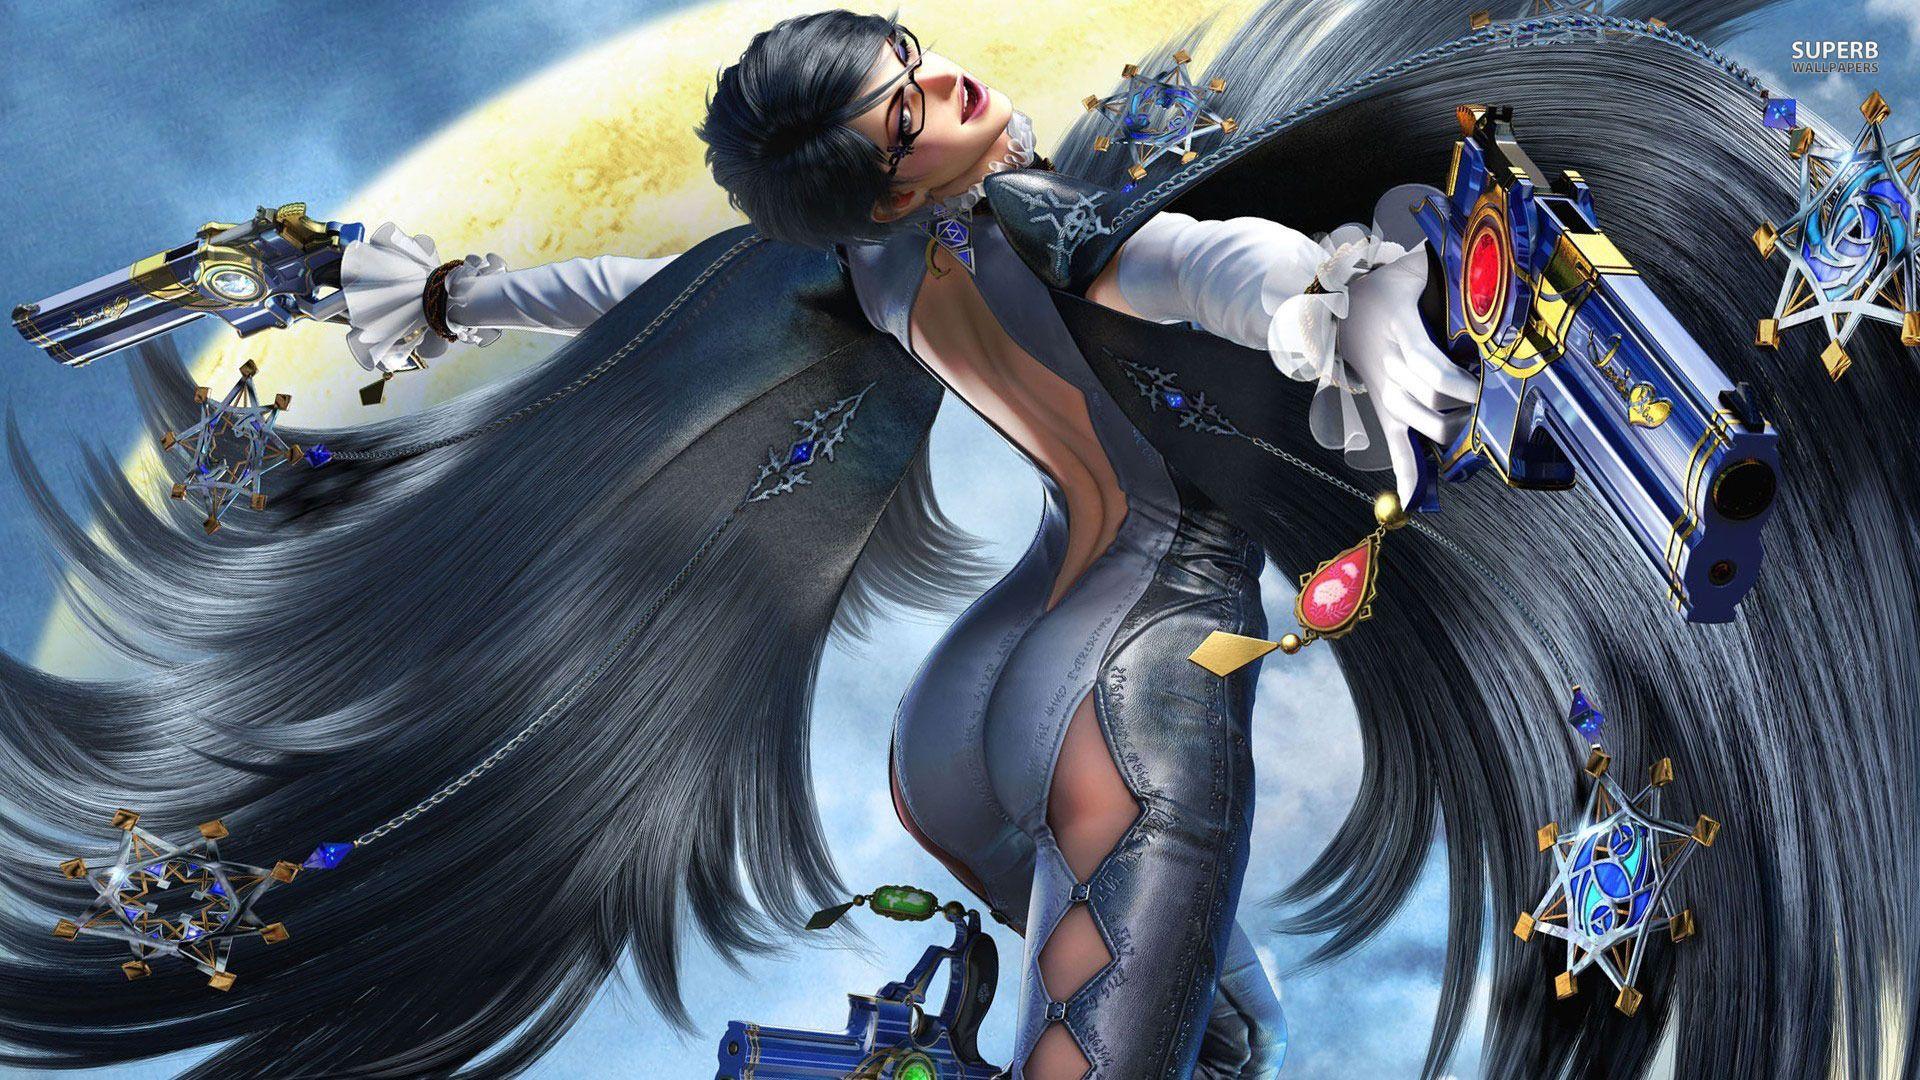 Bayonetta 2K Wallpapers and Backgrounds Wallpaper